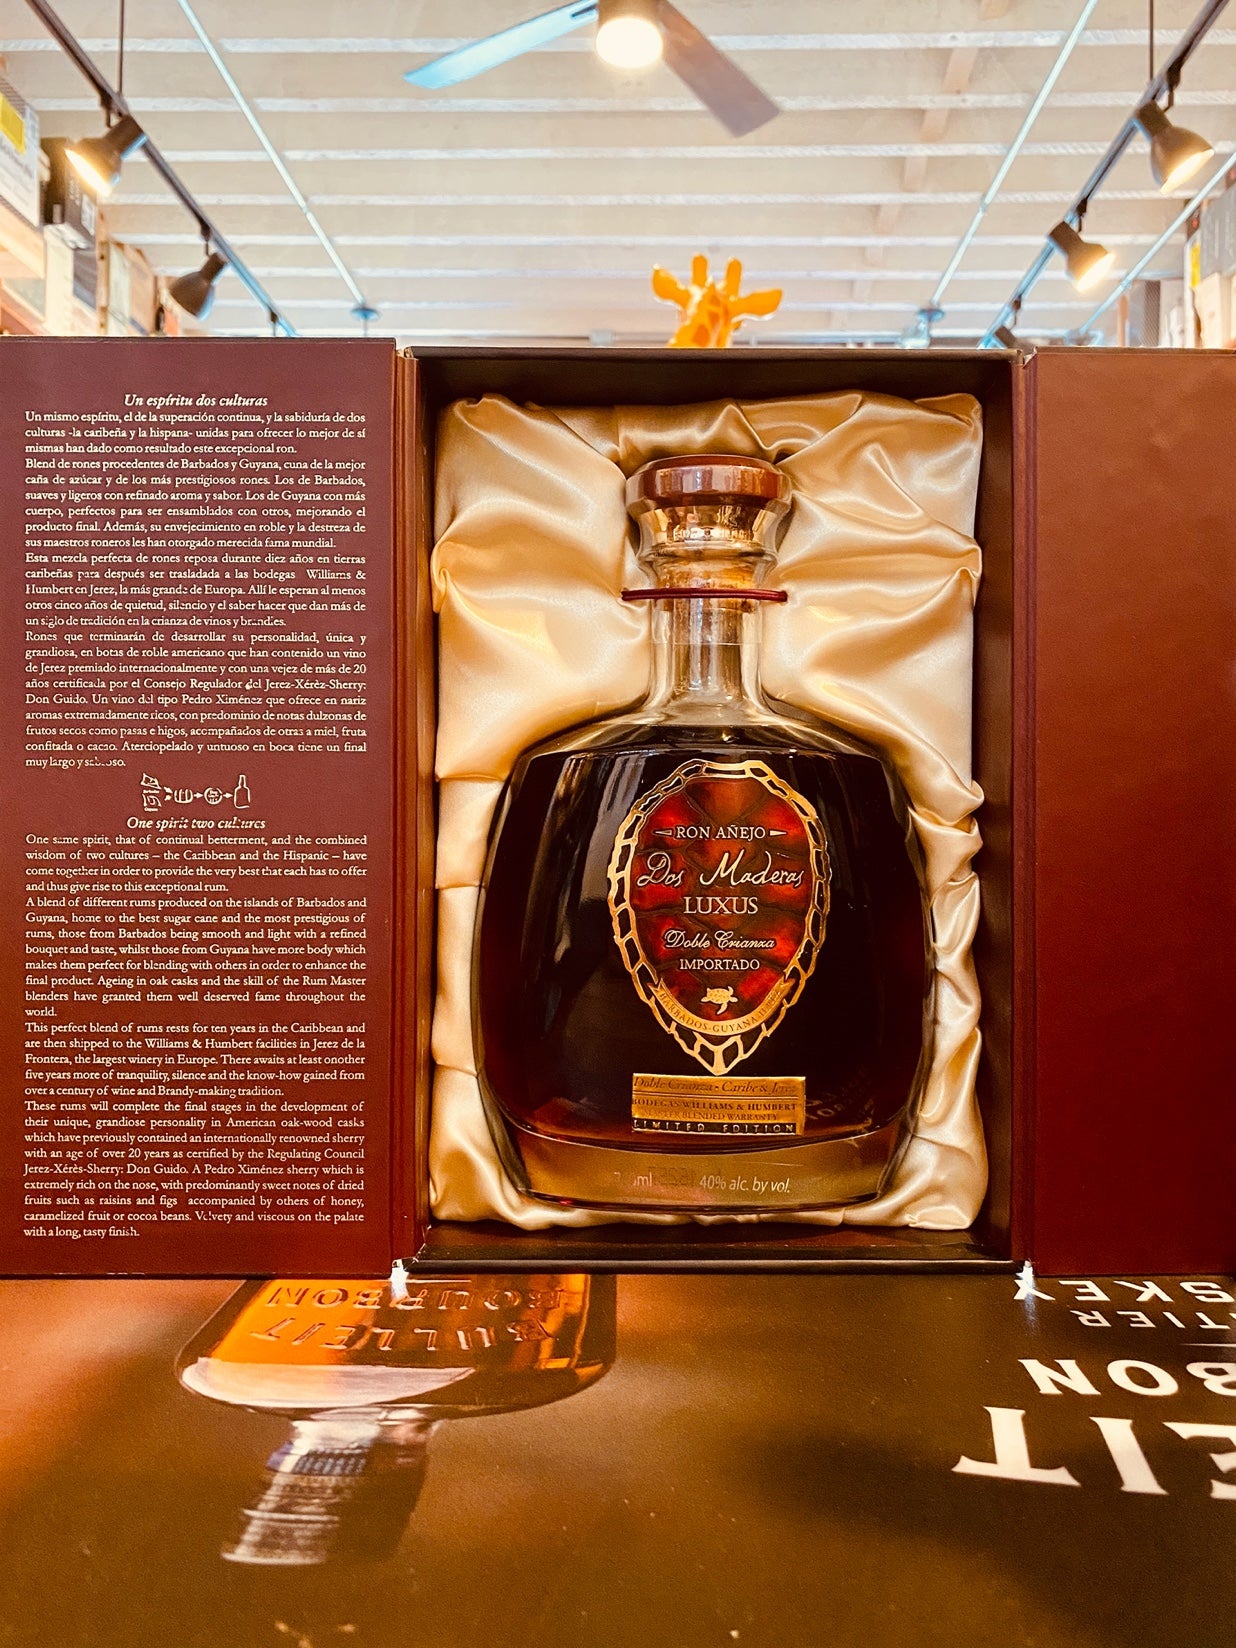 Dos Maderas Rum Luxus 750mL an open maroon colored box with a squat short rounded bottle inside a silk backing with a ruby red label and wooden top